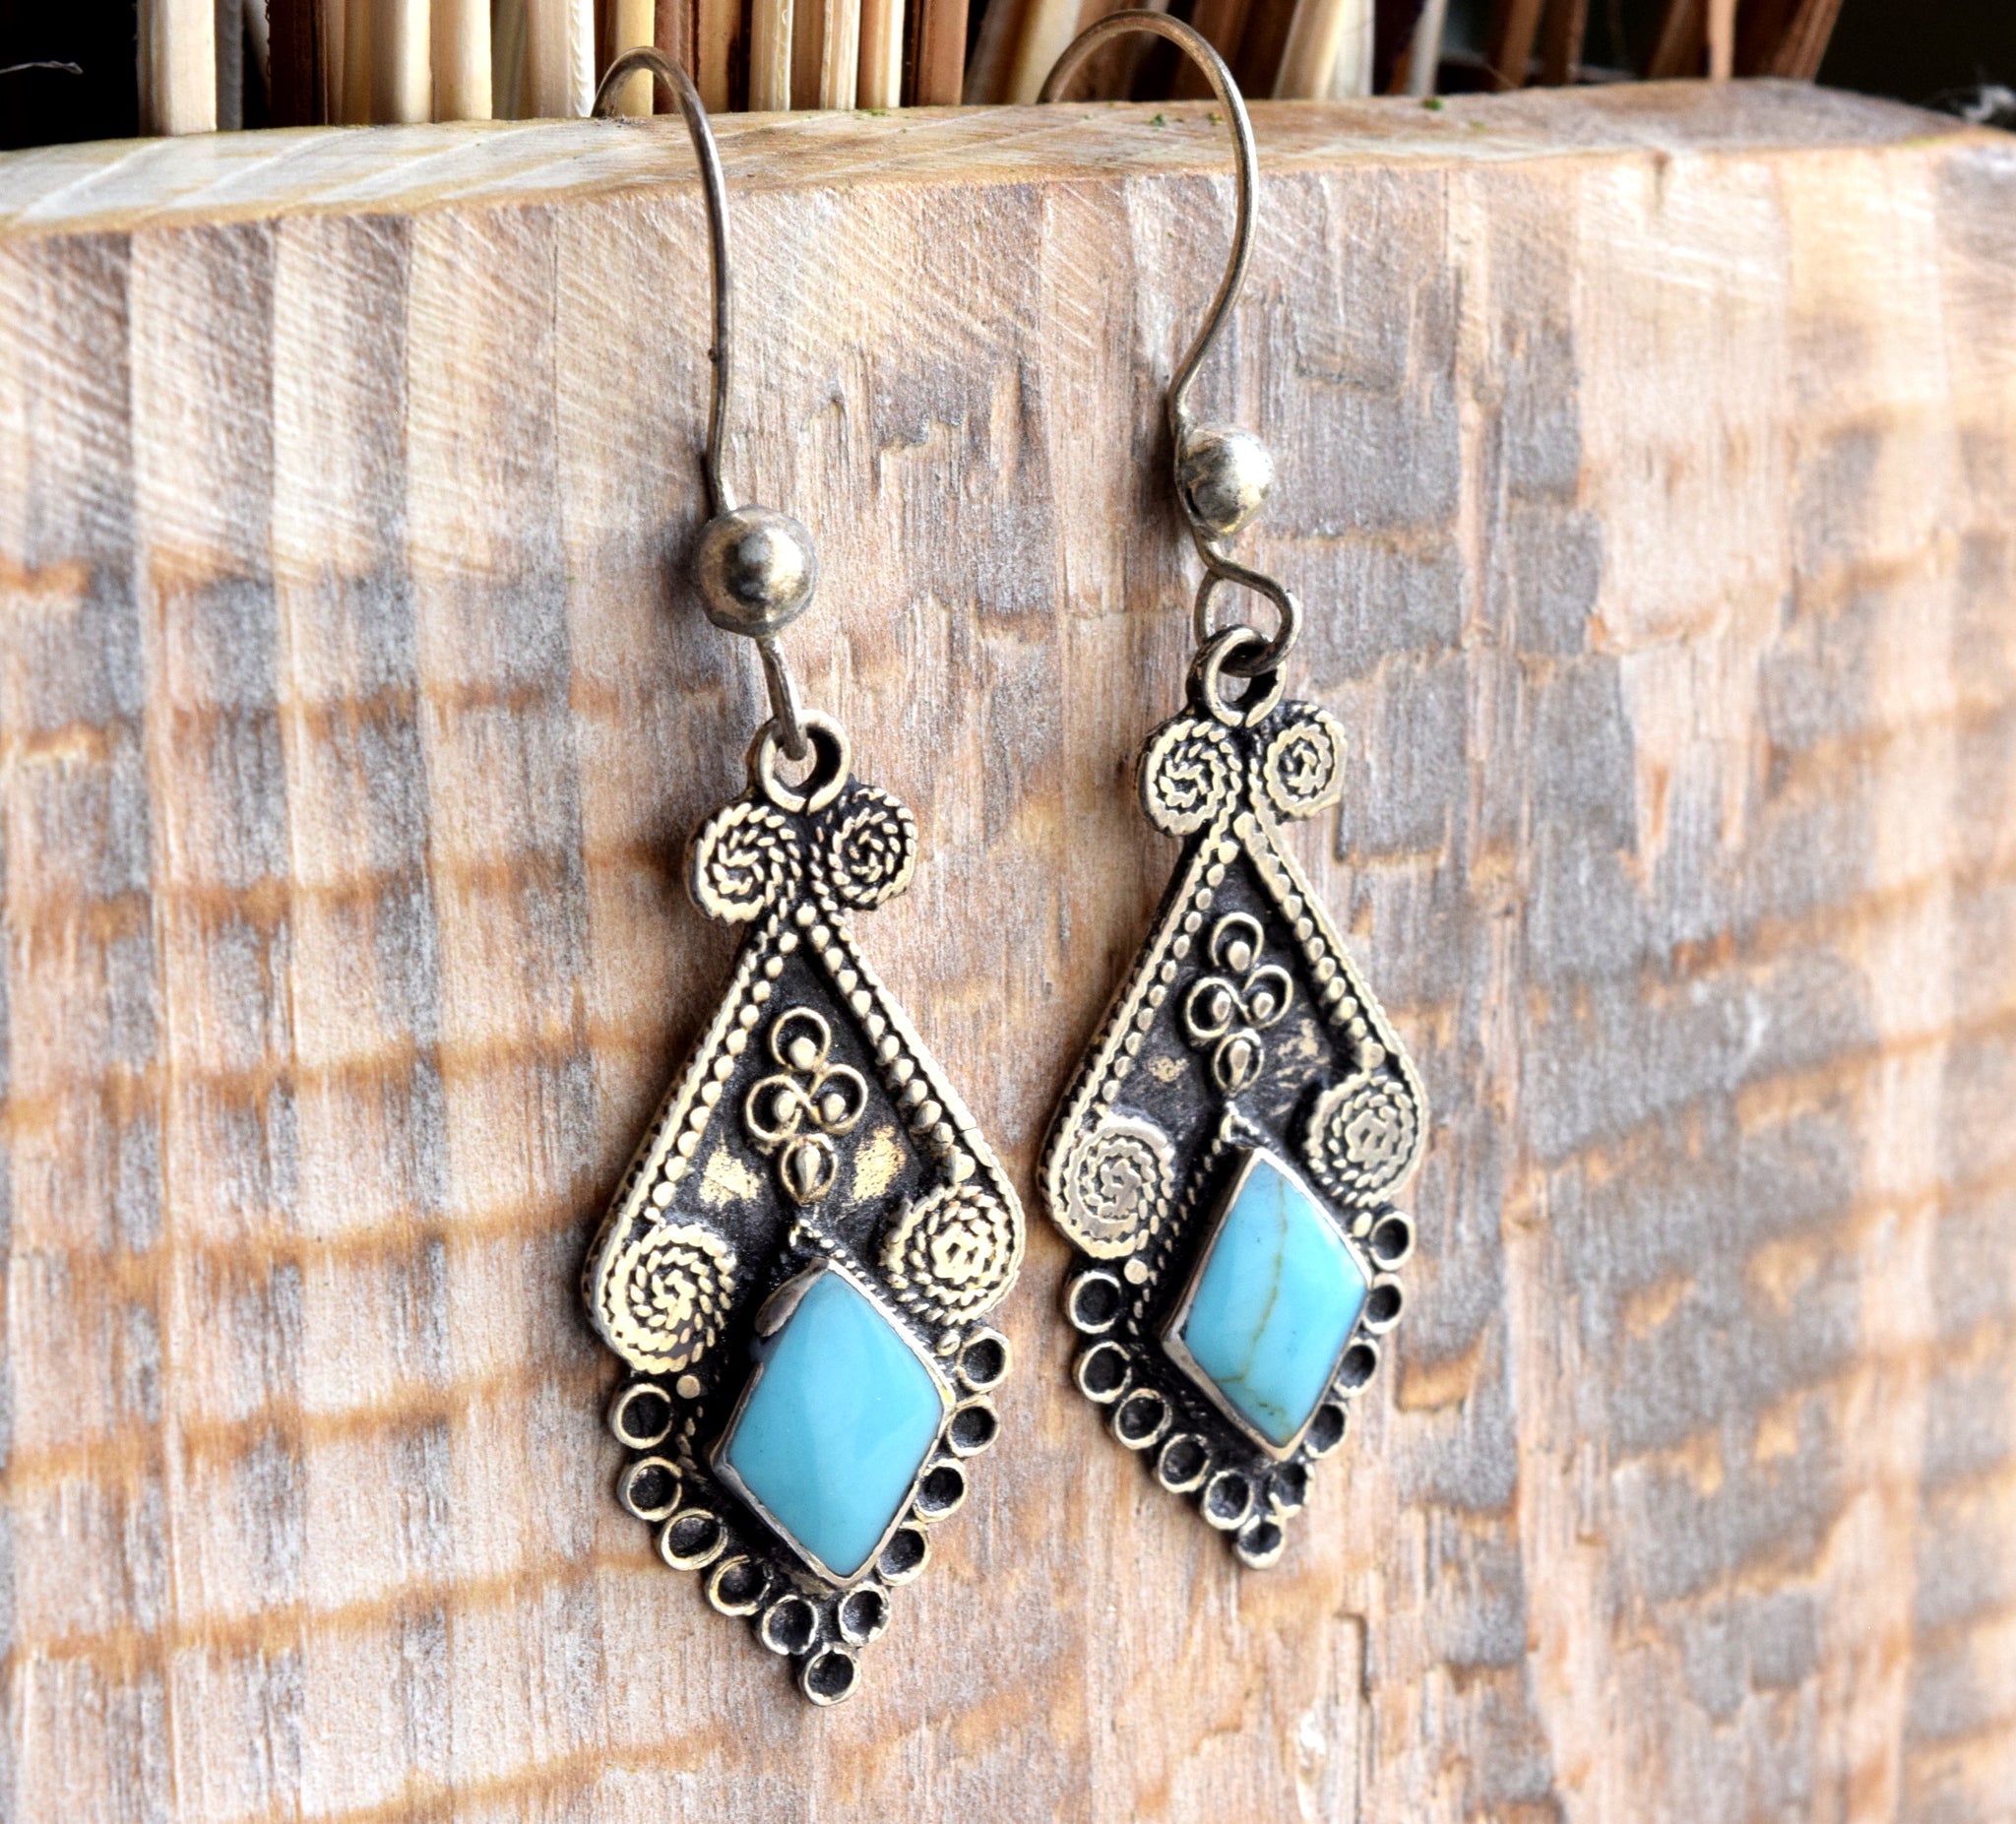 Turquoise Silver Plated Earrings